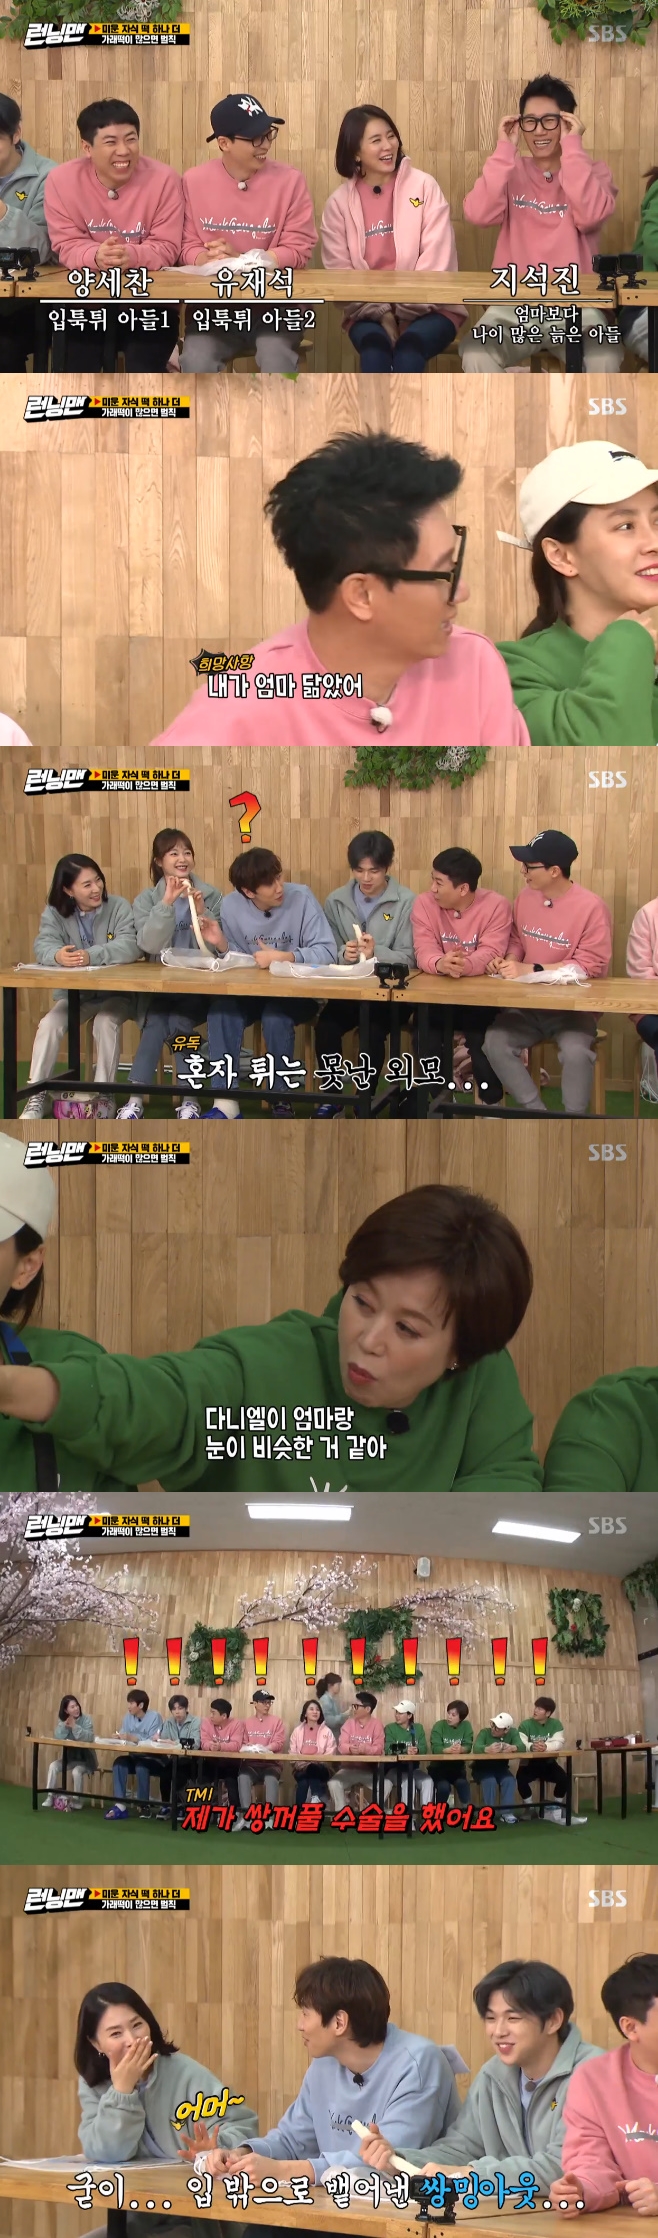 Actor Hwang Young hee in Running Man has had a surprise Confessions of double eyelid surgery.In the SBS entertainment program Running Man broadcasted on the afternoon of the 22nd, actors Lee Il-hwa, Hwang Young hee, comedian Park Mi-sun and singer Daniel appeared as guests and featured Family Race with Mom and Children.Our team consisted of two older sons with a mouth out, said Yoo Jae-Suk of the Lee Il-hwa team, and Ji Suk-jin said, I look like my mother.In the meantime, Yoo Jae-Suk laughed at Lee Kwang-soo of the Hwang Young hee team and said, Is the person in the middle family?Hwang Young hee responded pleasantly, I am a gene (to Daniel), and surprised the members by saying I had a double eyelid surgery in the words of Park Mi-sun, My eyes resemble.Lee Kwang-soo, who heard this, was surprised to say, Do you even talk about it? And Yang said, I am not upset.